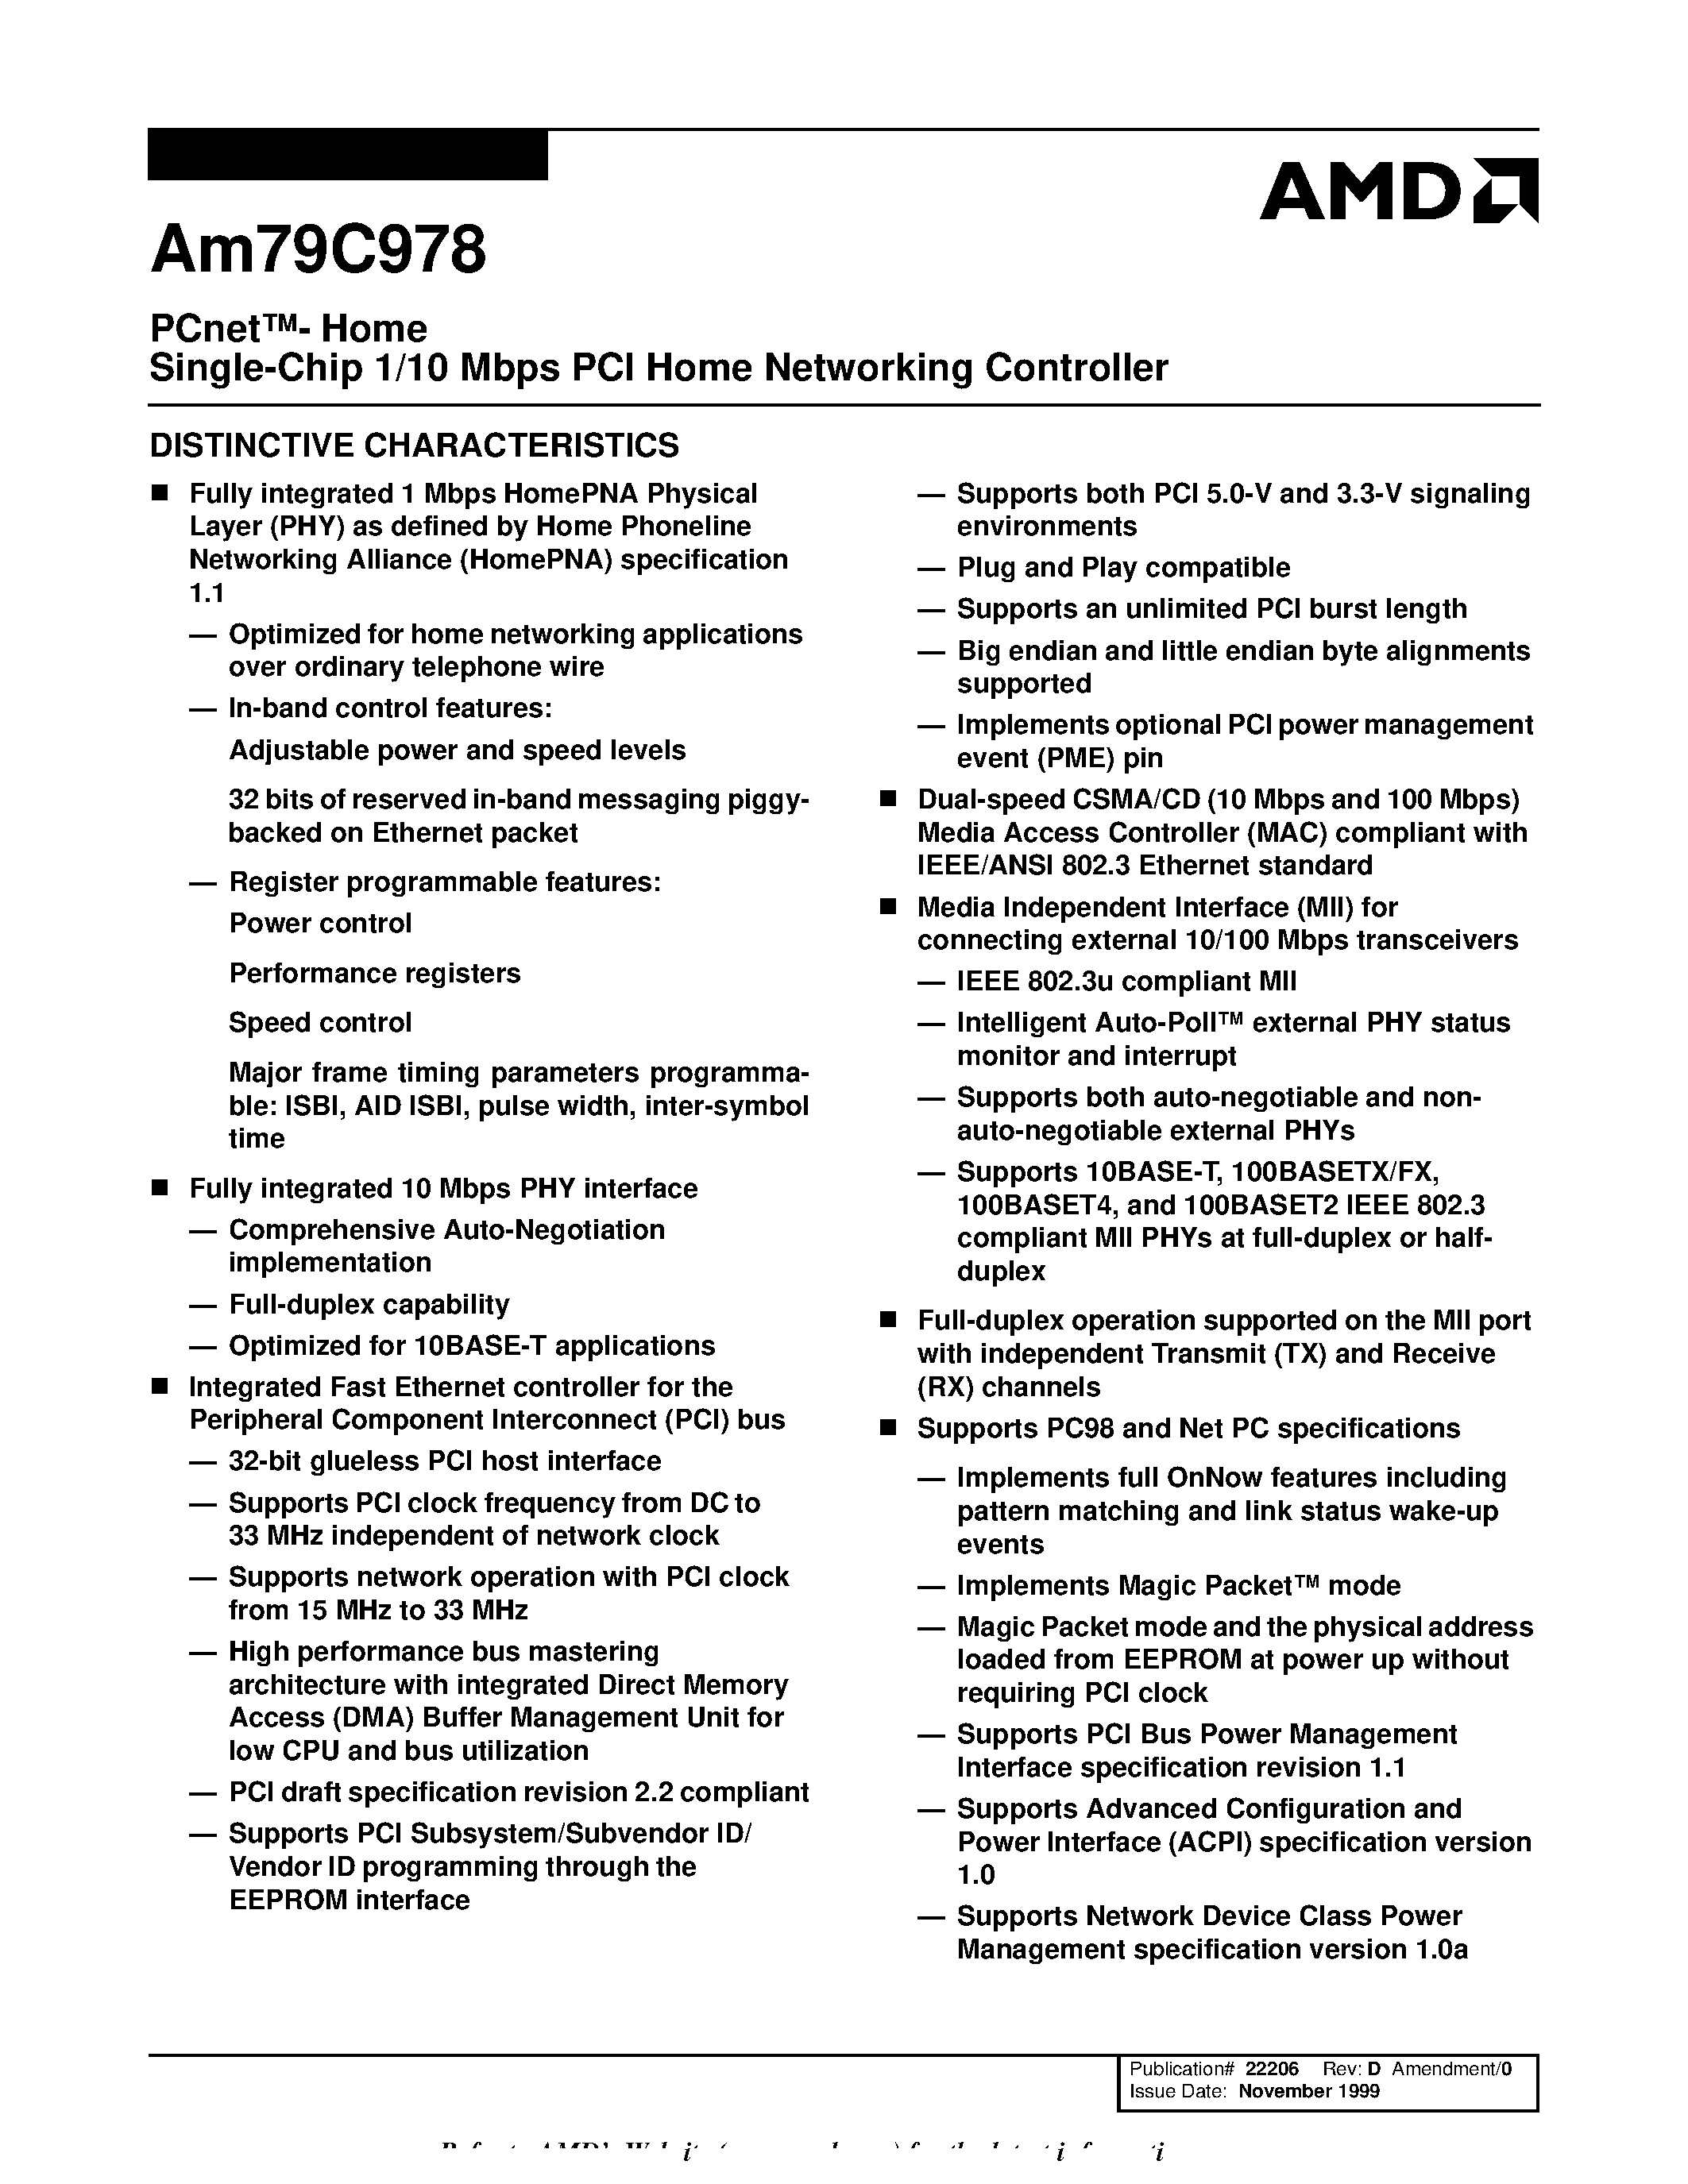 Datasheet AM79C978 - Single-Chip 1/10 Mbps PCI Home Networking Controller page 1